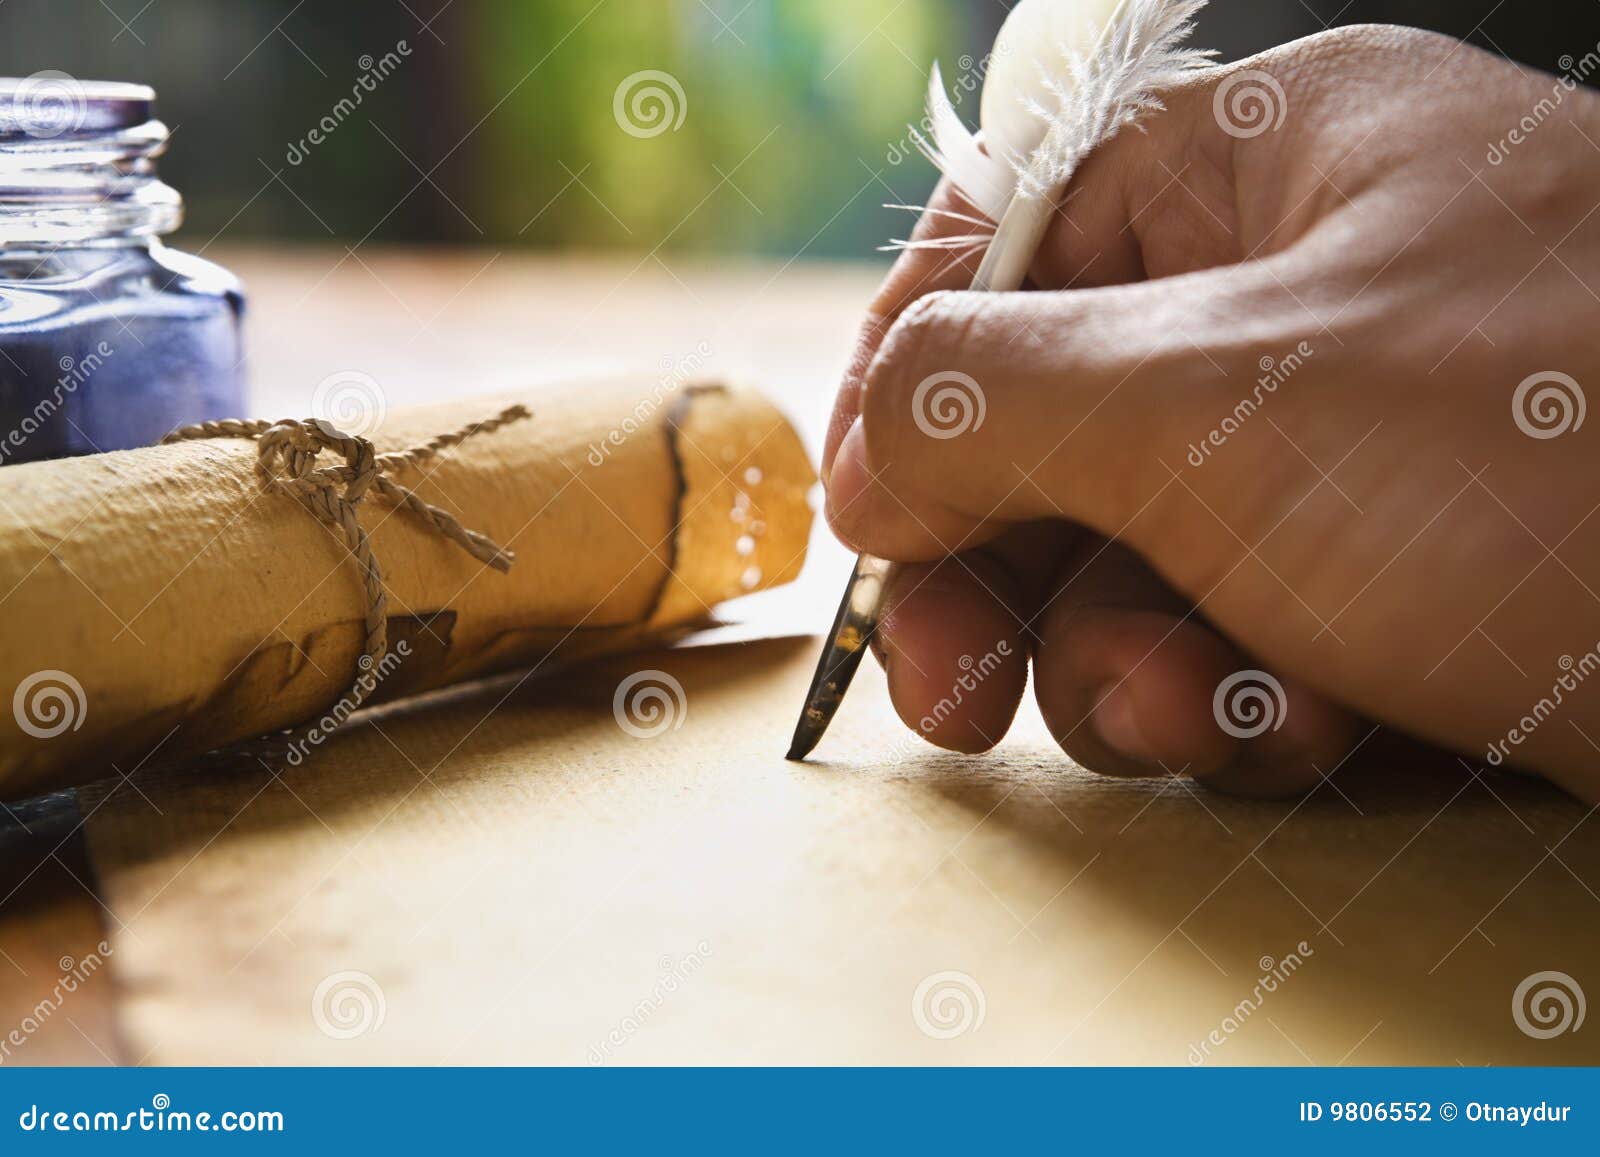 hand writing using quill pen